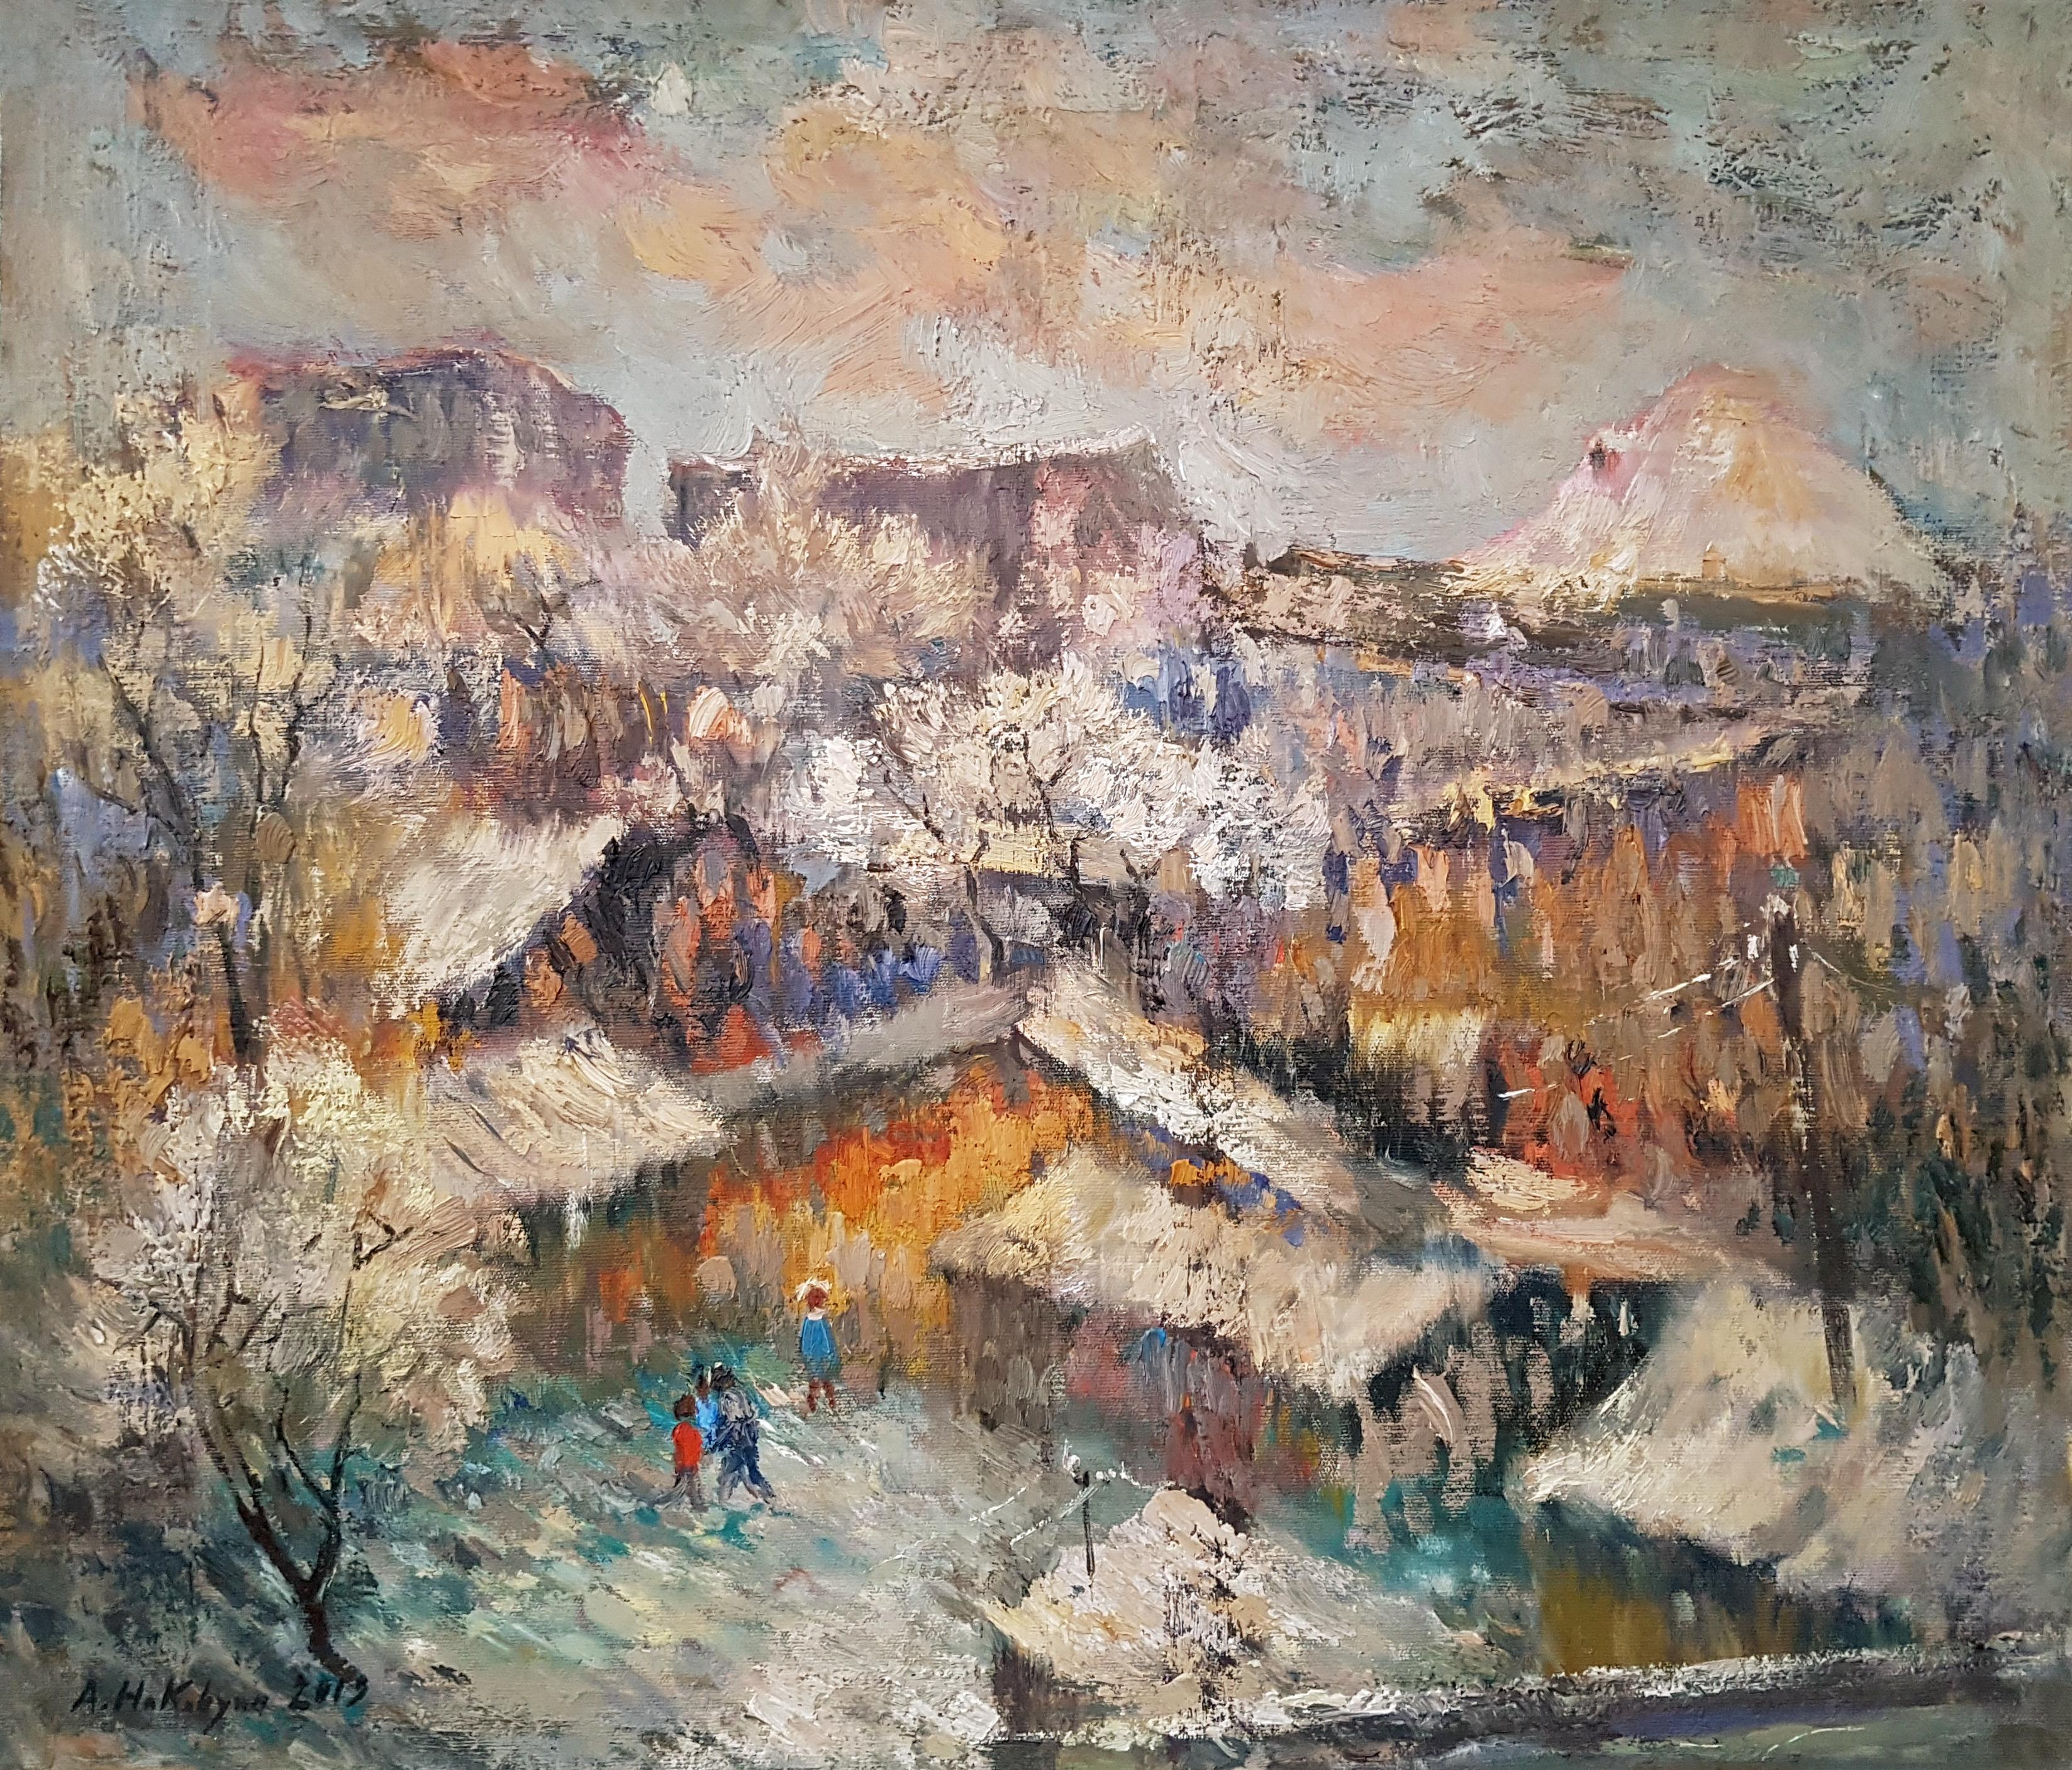 Ara H. Hakobyan Landscape Painting - Winter Day in Old Yard, Original Oil Painting, One of a Kind